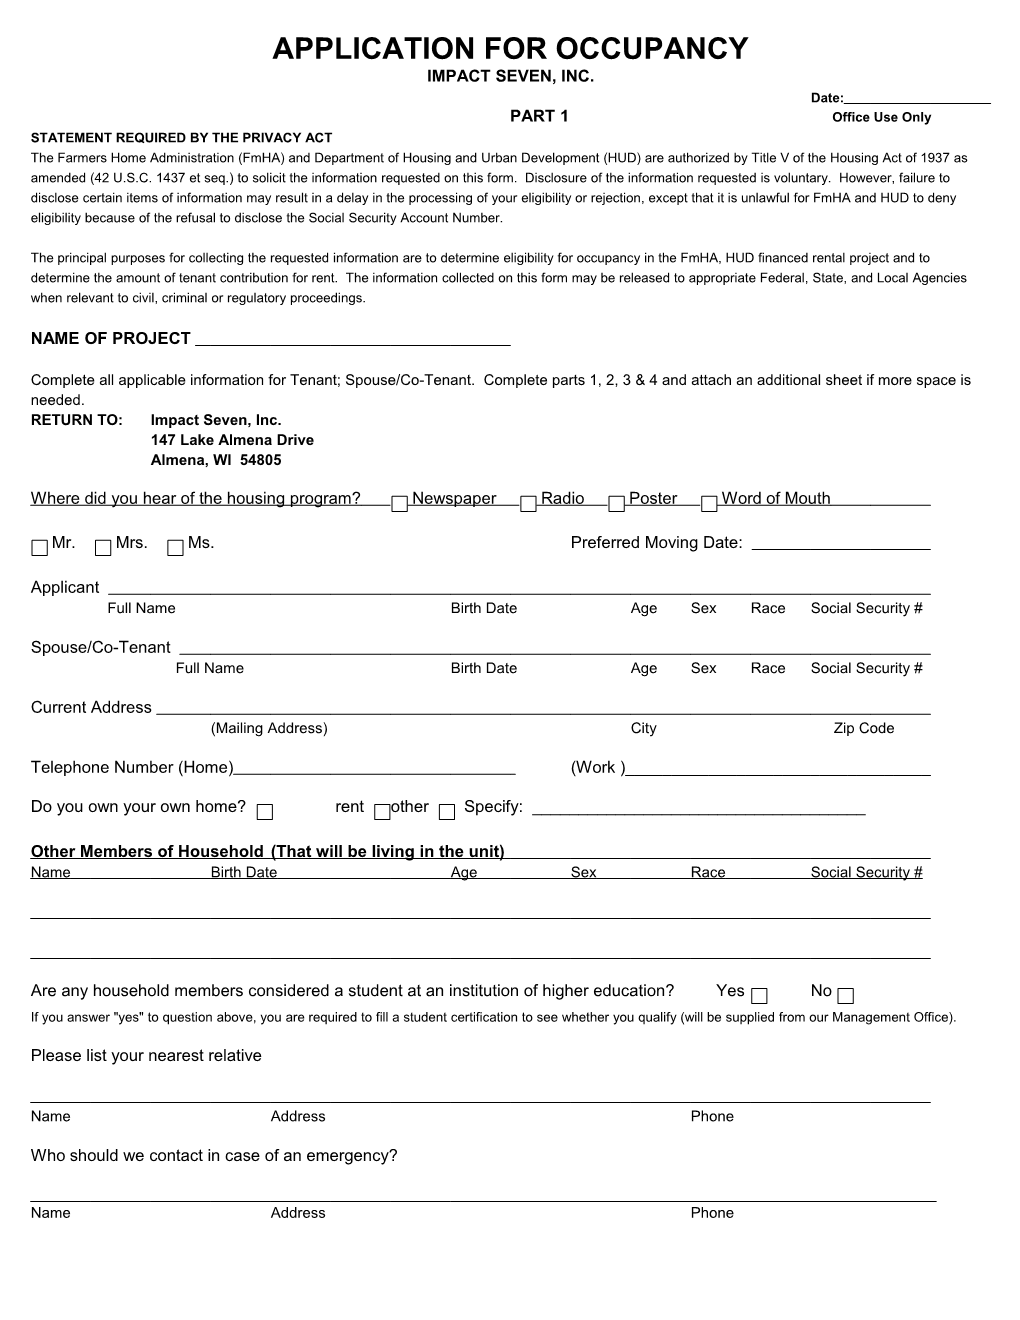 Application for Occupancy s1